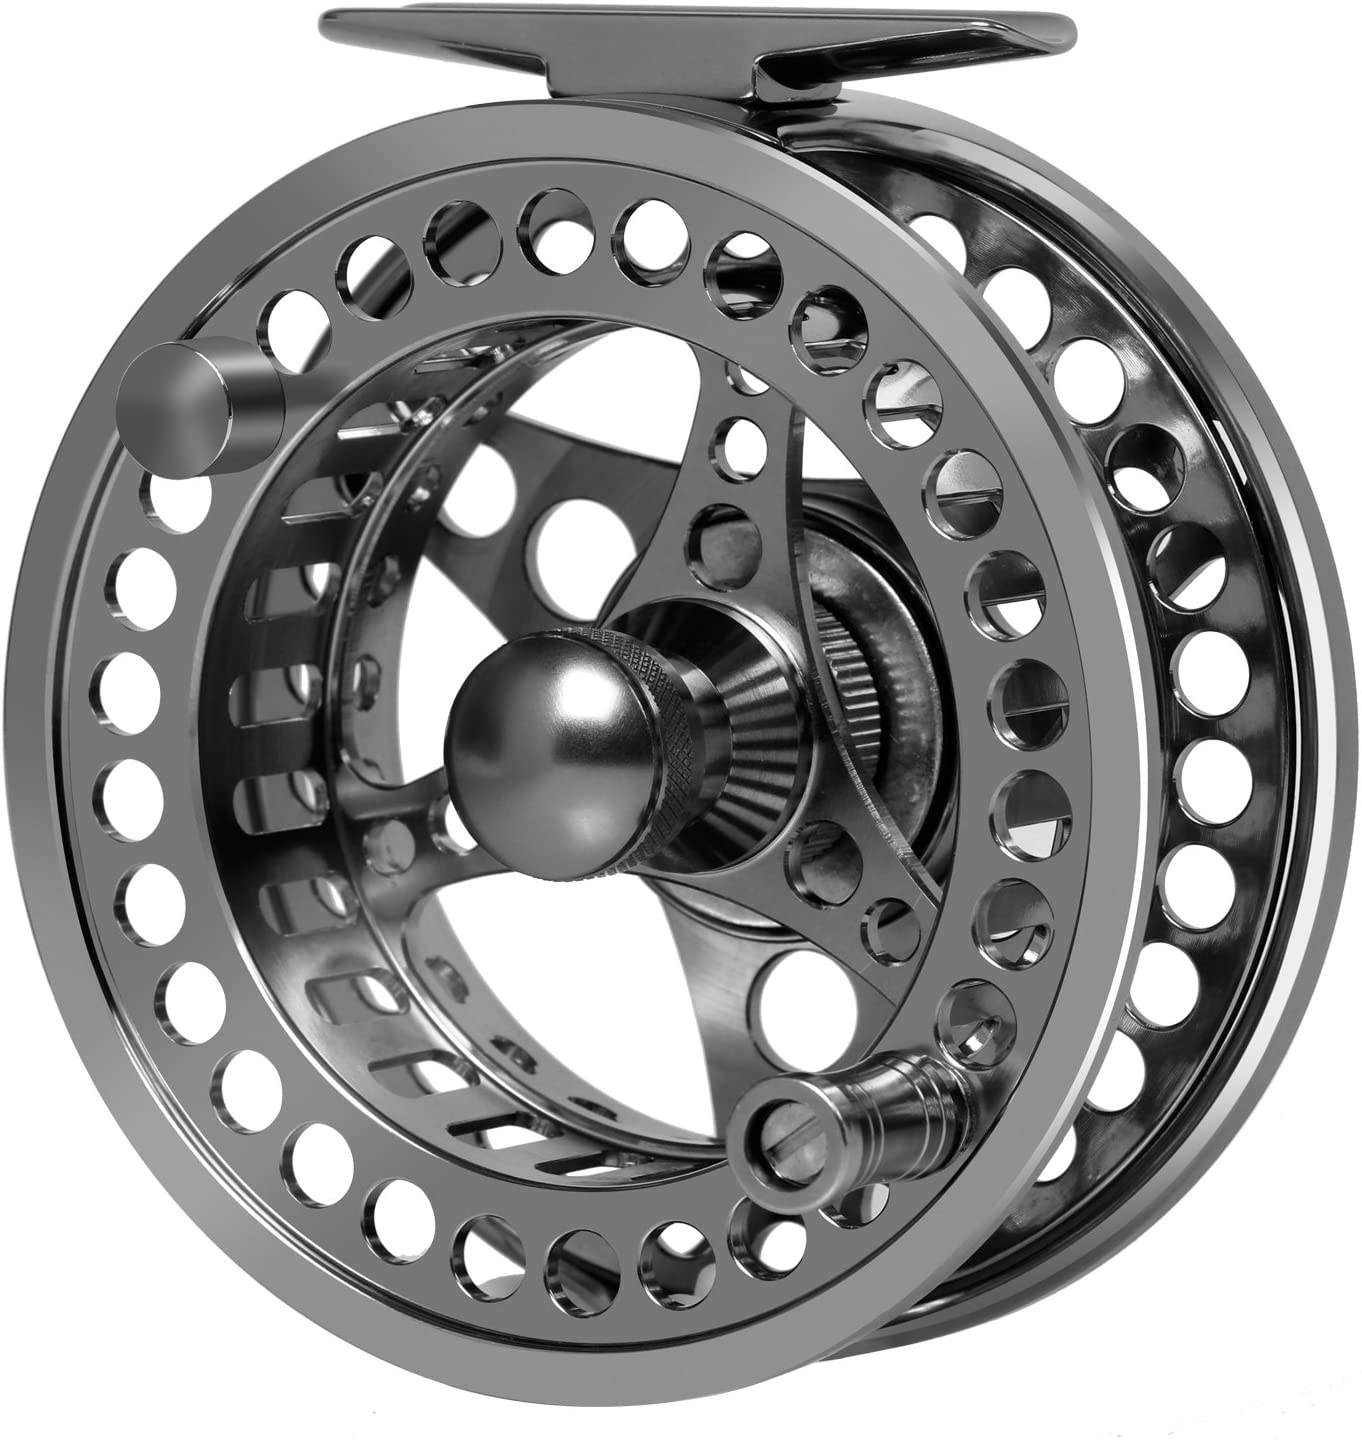 Wild Water FORTIS CNC Machined Aluminum 3/4 Weight Fly Fishing